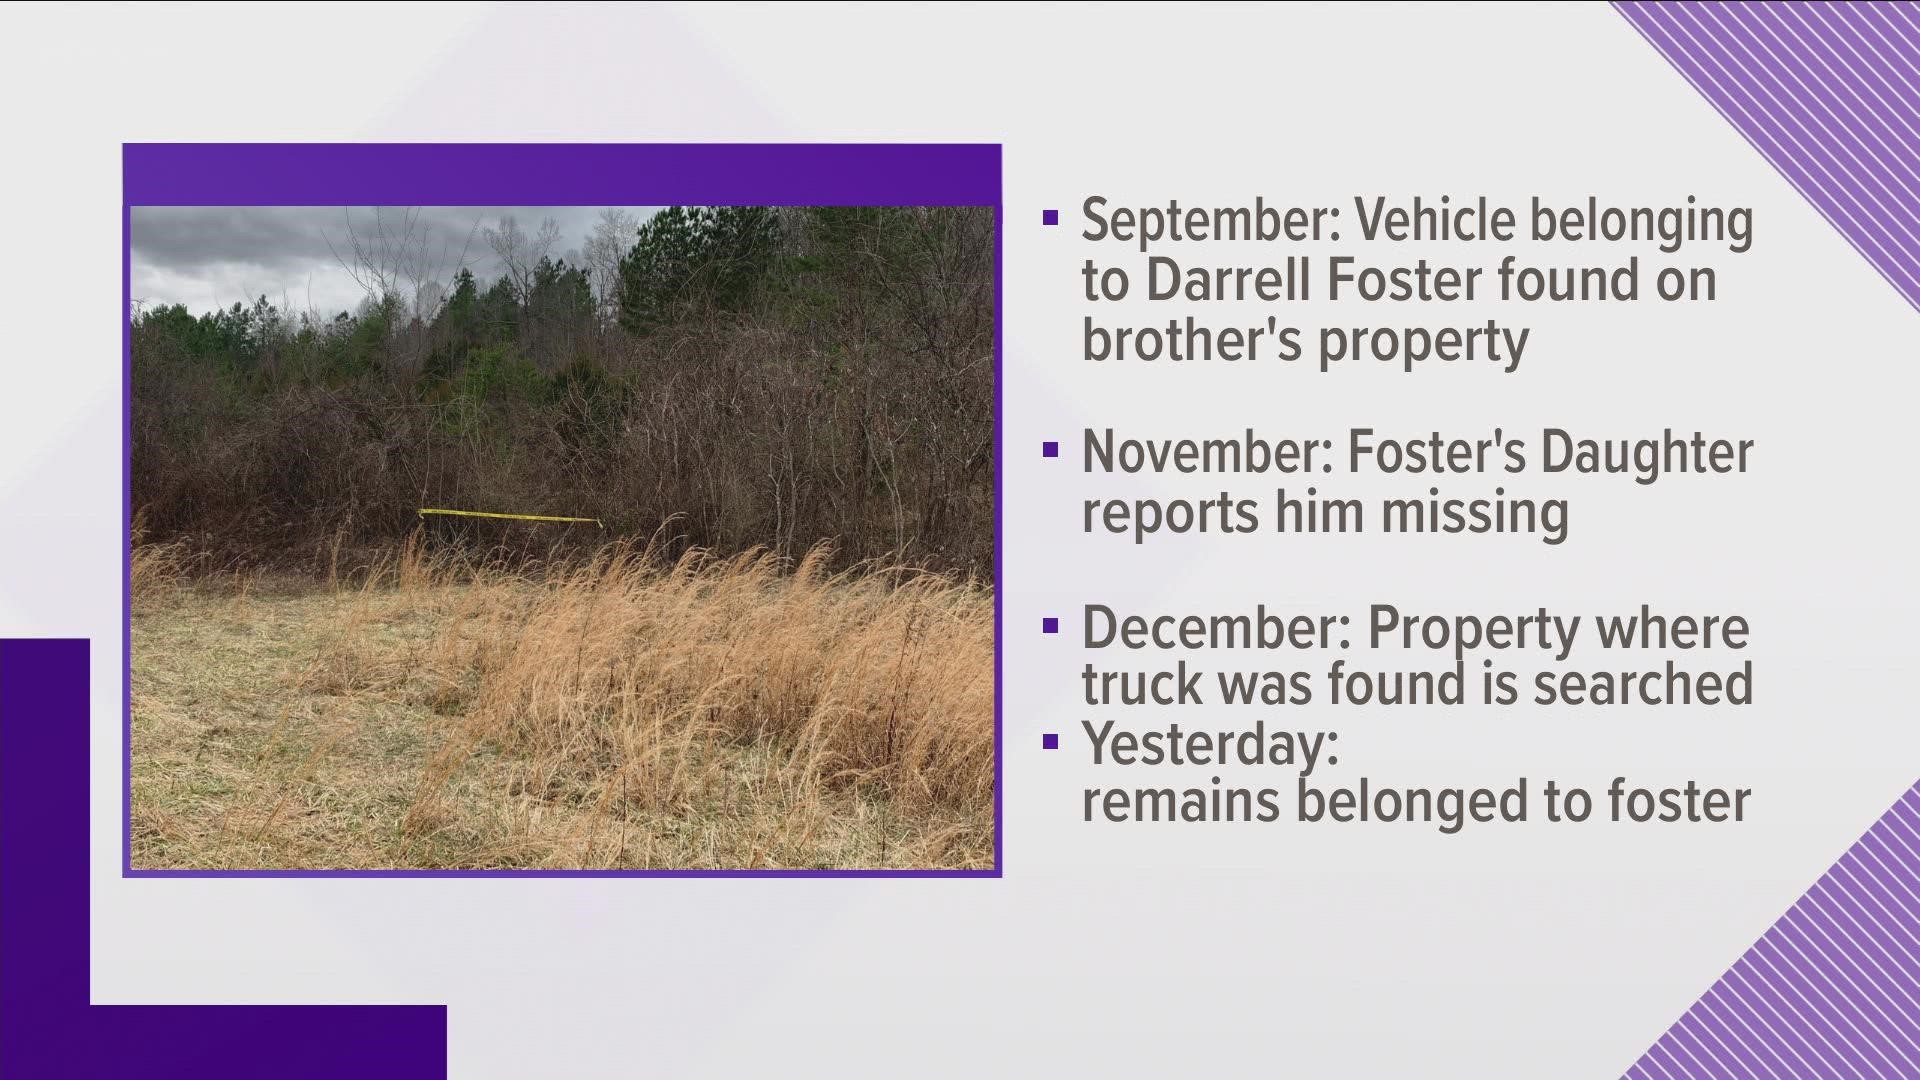 Officials said a vehicle registered to Darrell Foster was found in September 2021, and his brother said they had not seen each other in a while.